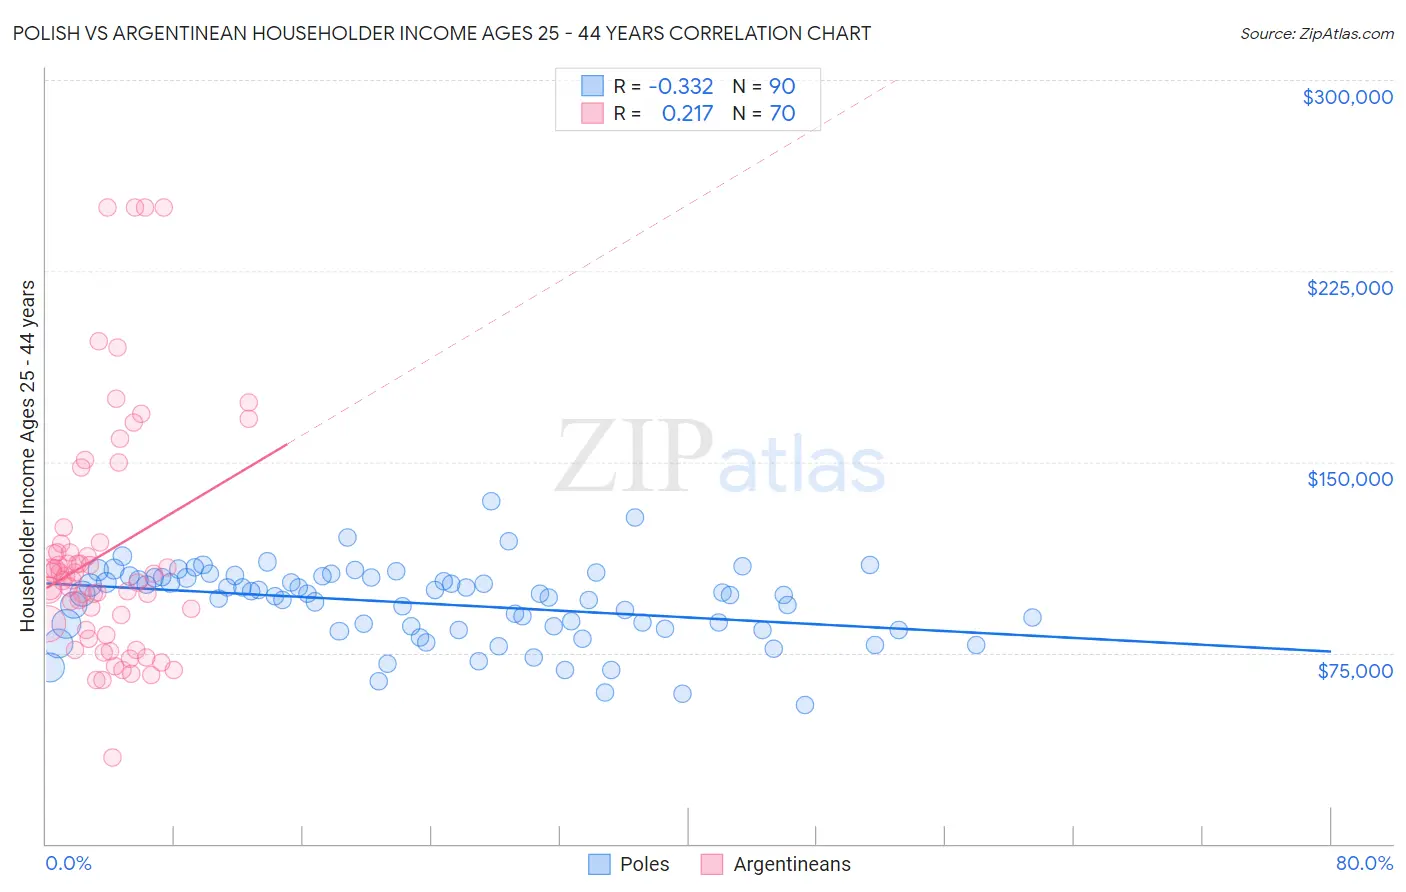 Polish vs Argentinean Householder Income Ages 25 - 44 years